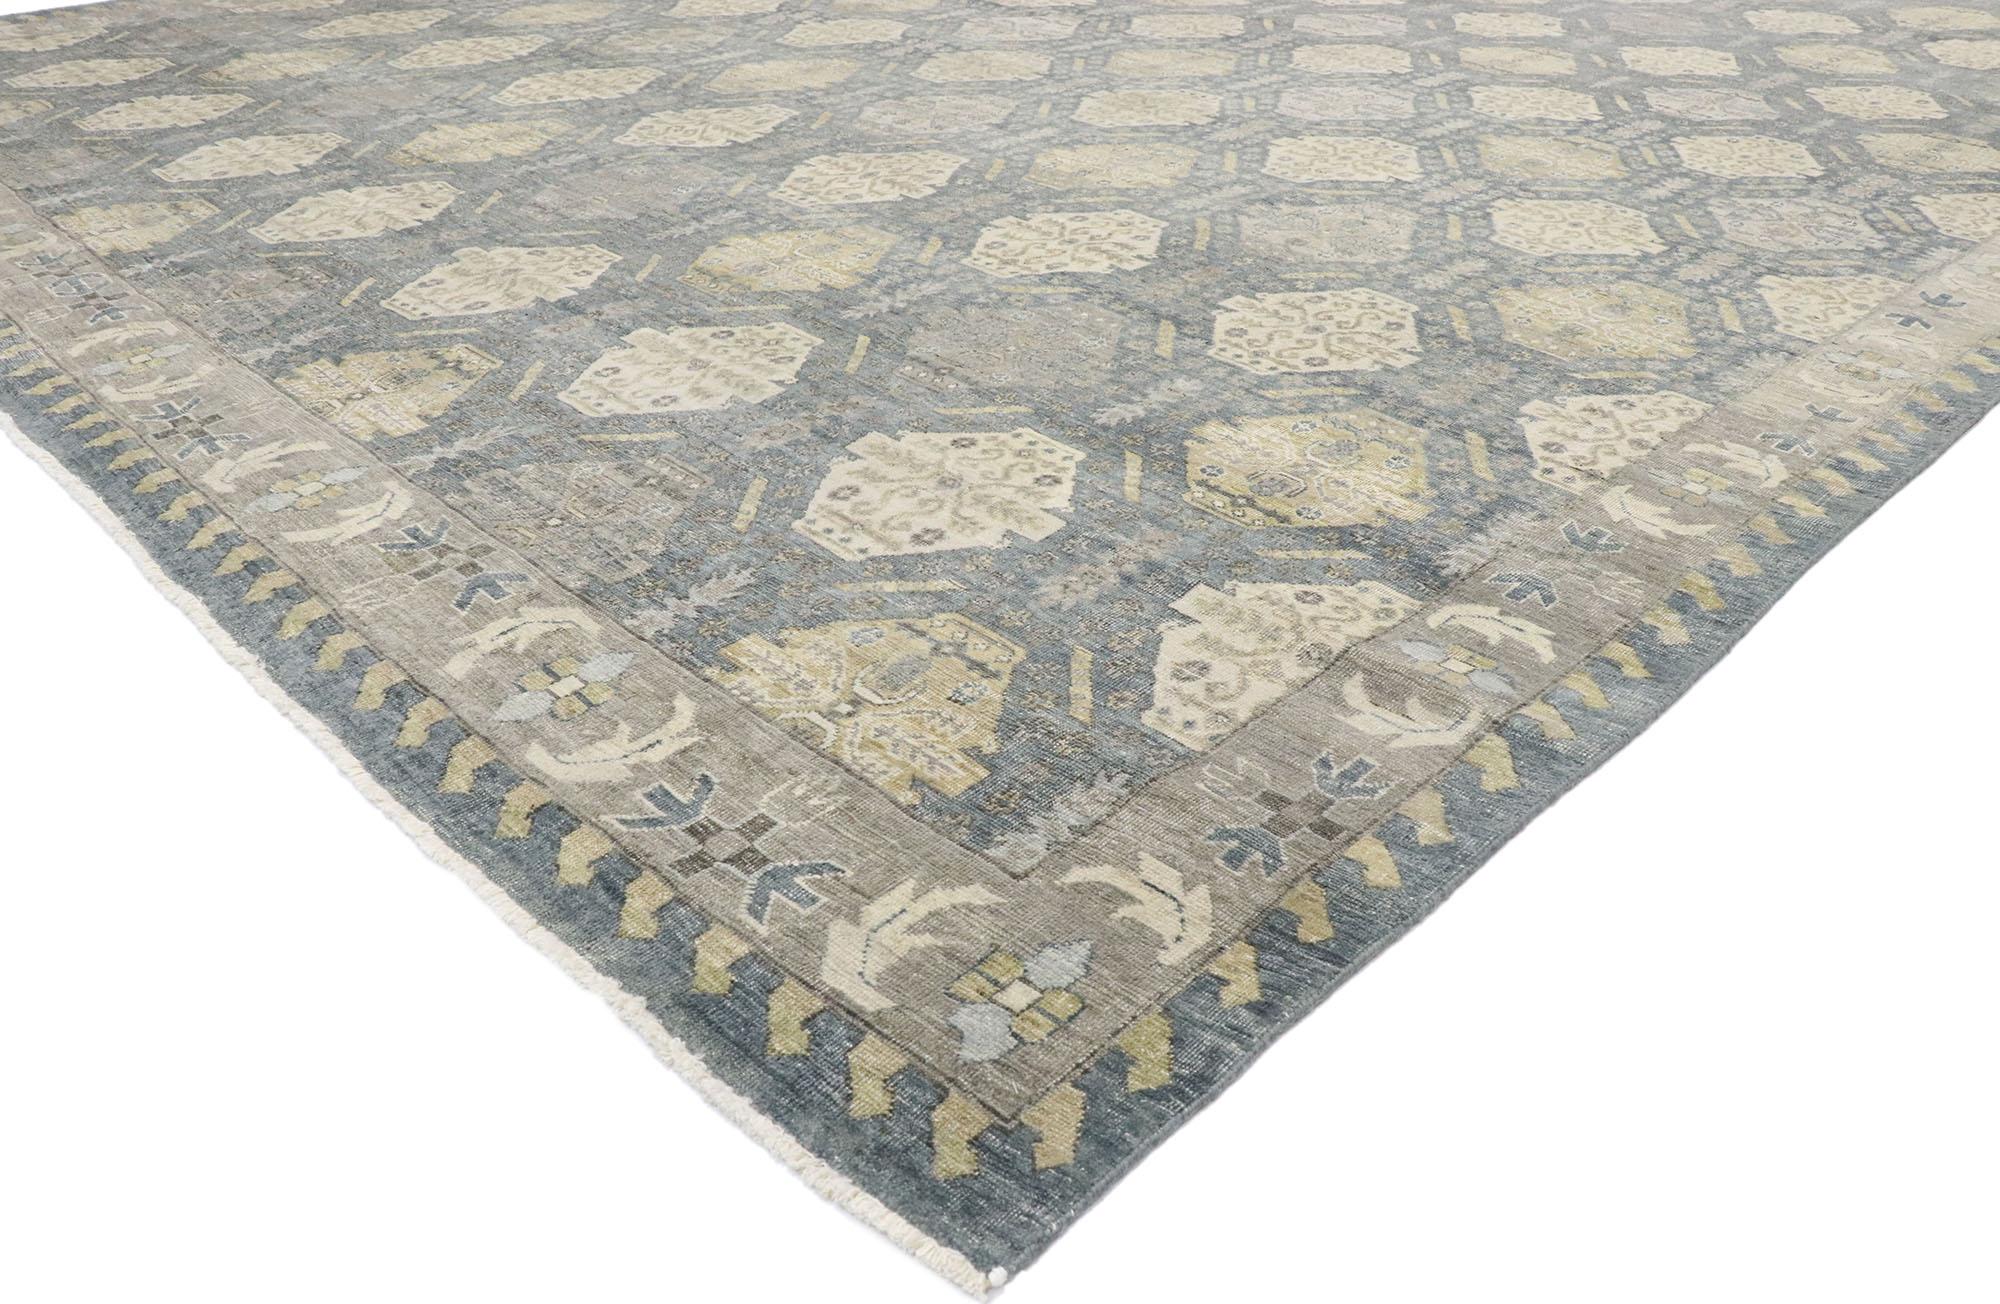 30622 Vintage-Inspired Oushak Rug, 11'09 x 15'01.
Modern style meets rustic sensibility in this hand knotted wool vintage-inspired Oushak rug. The botanical design and soft earthy colorway woven into this piece work together creating a curated